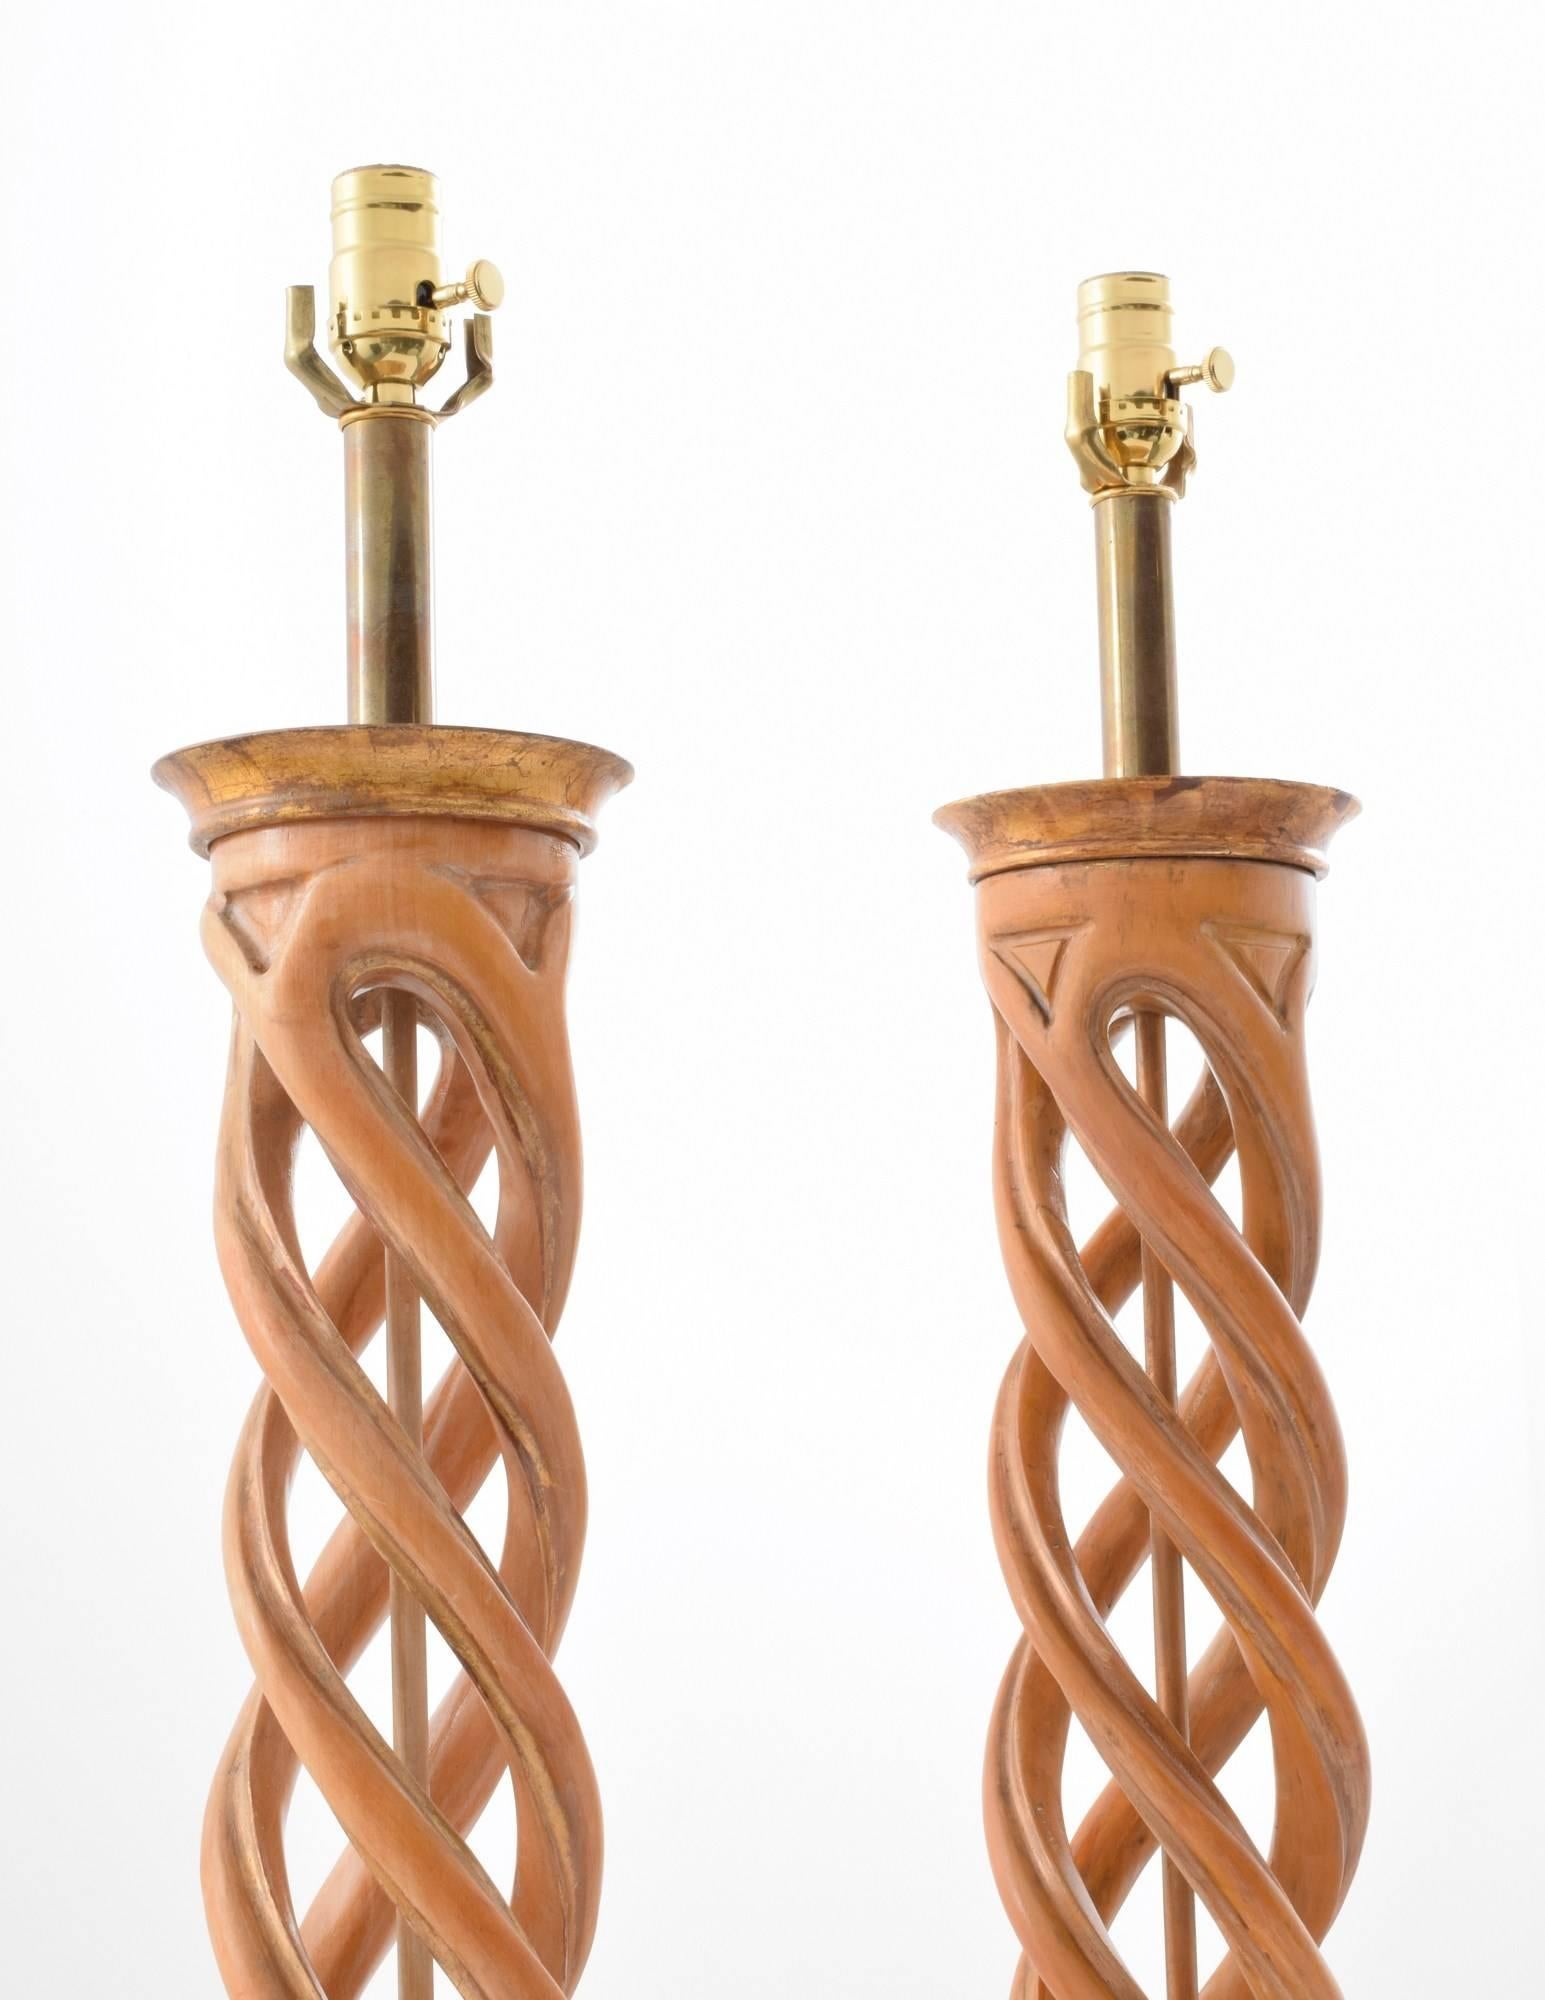 Pair of carved lamps with gold leaf wood bases and tops by Frederick Cooper Studios